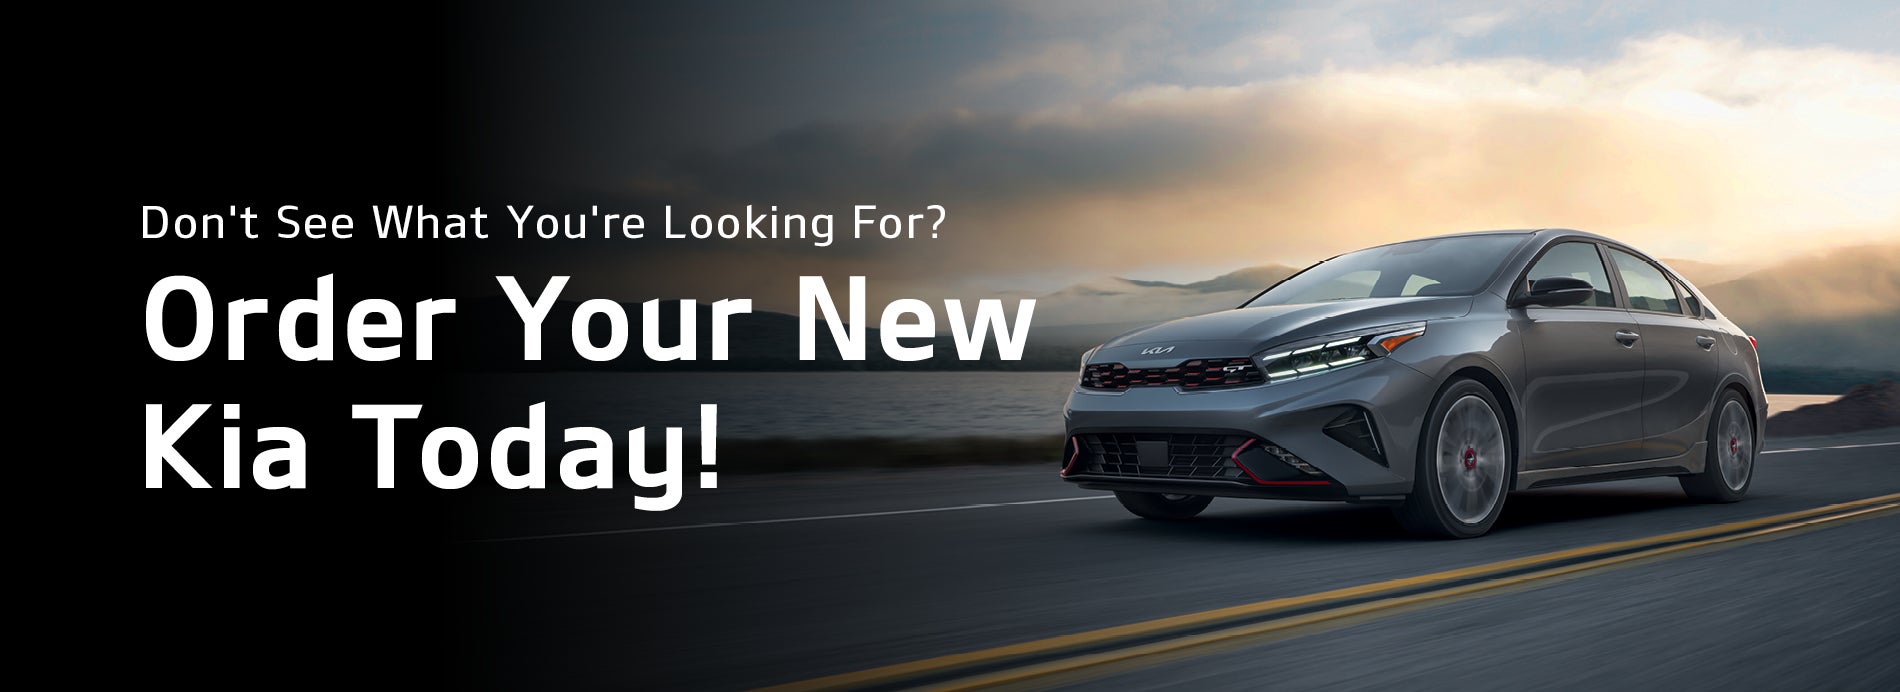 Don't see what you're looking for? Order your new Kia today!